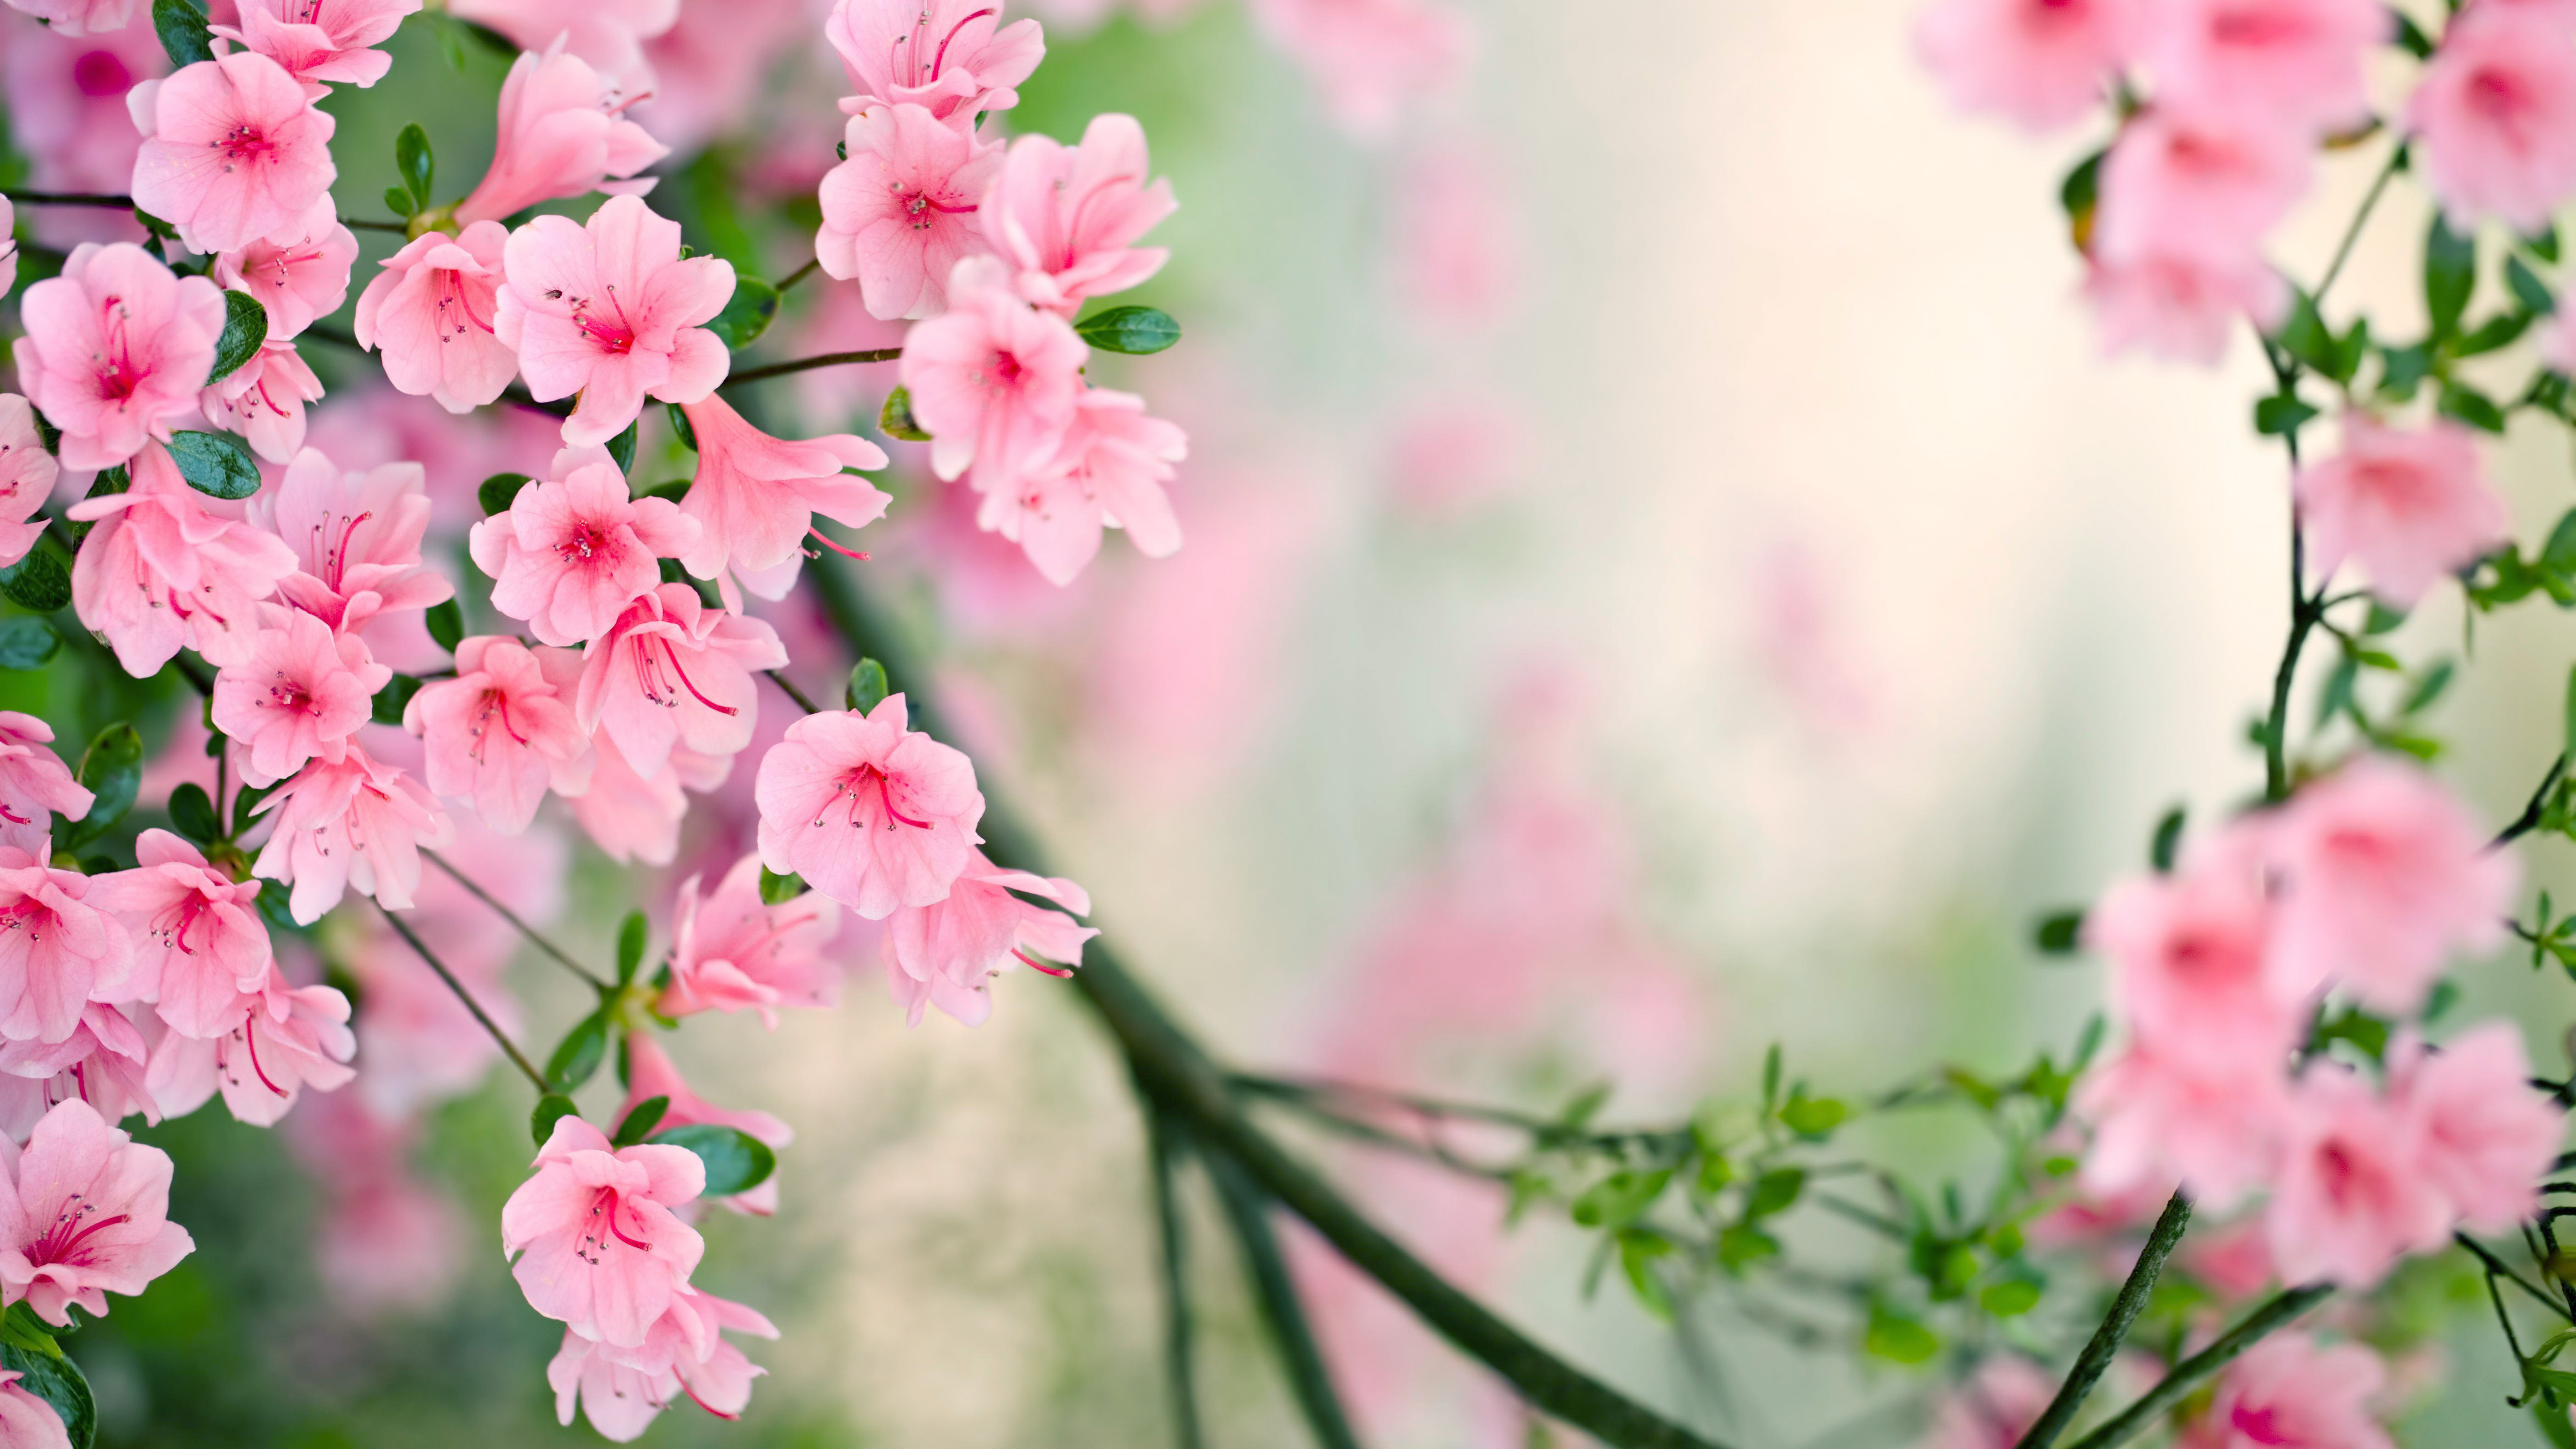 Nature Spring | Free Desktop Wallpapers for Widescreen, HD and Mobile